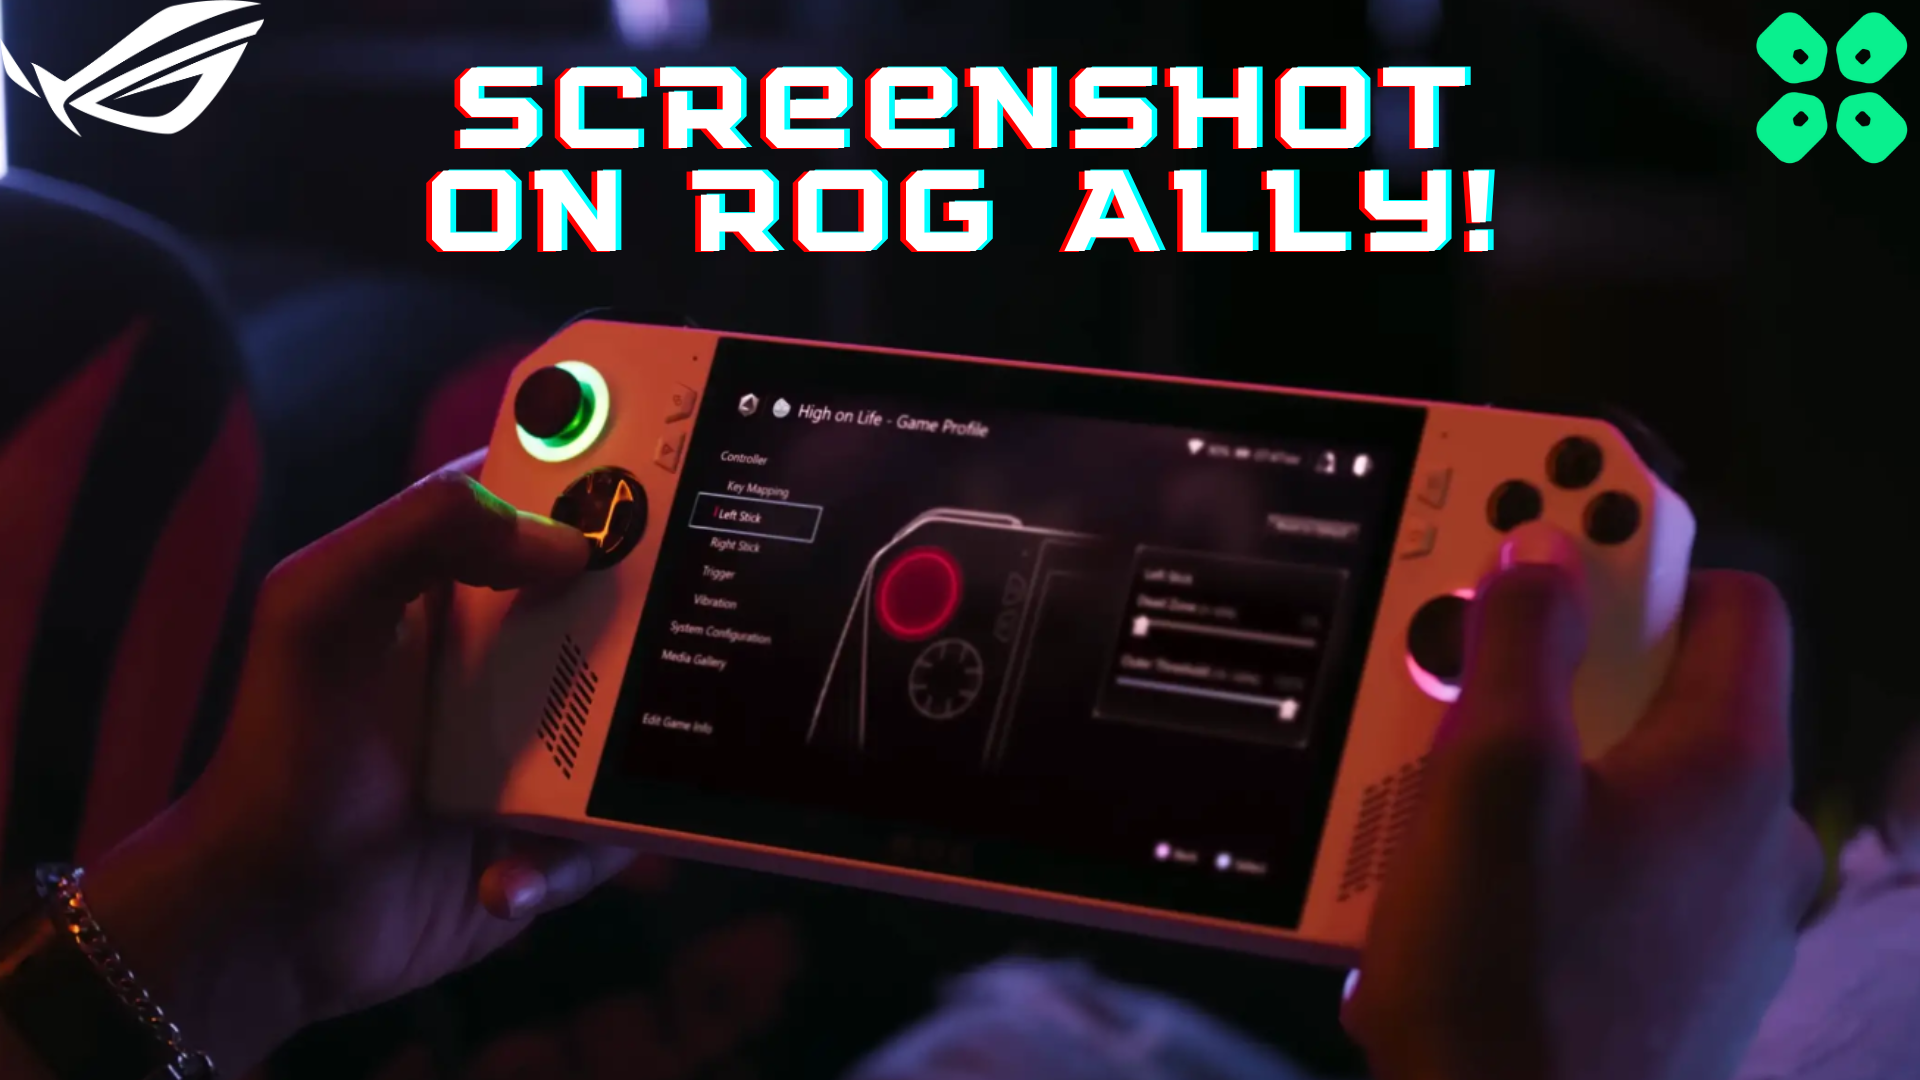 How to Take Screenshot on Asus ROG Ally